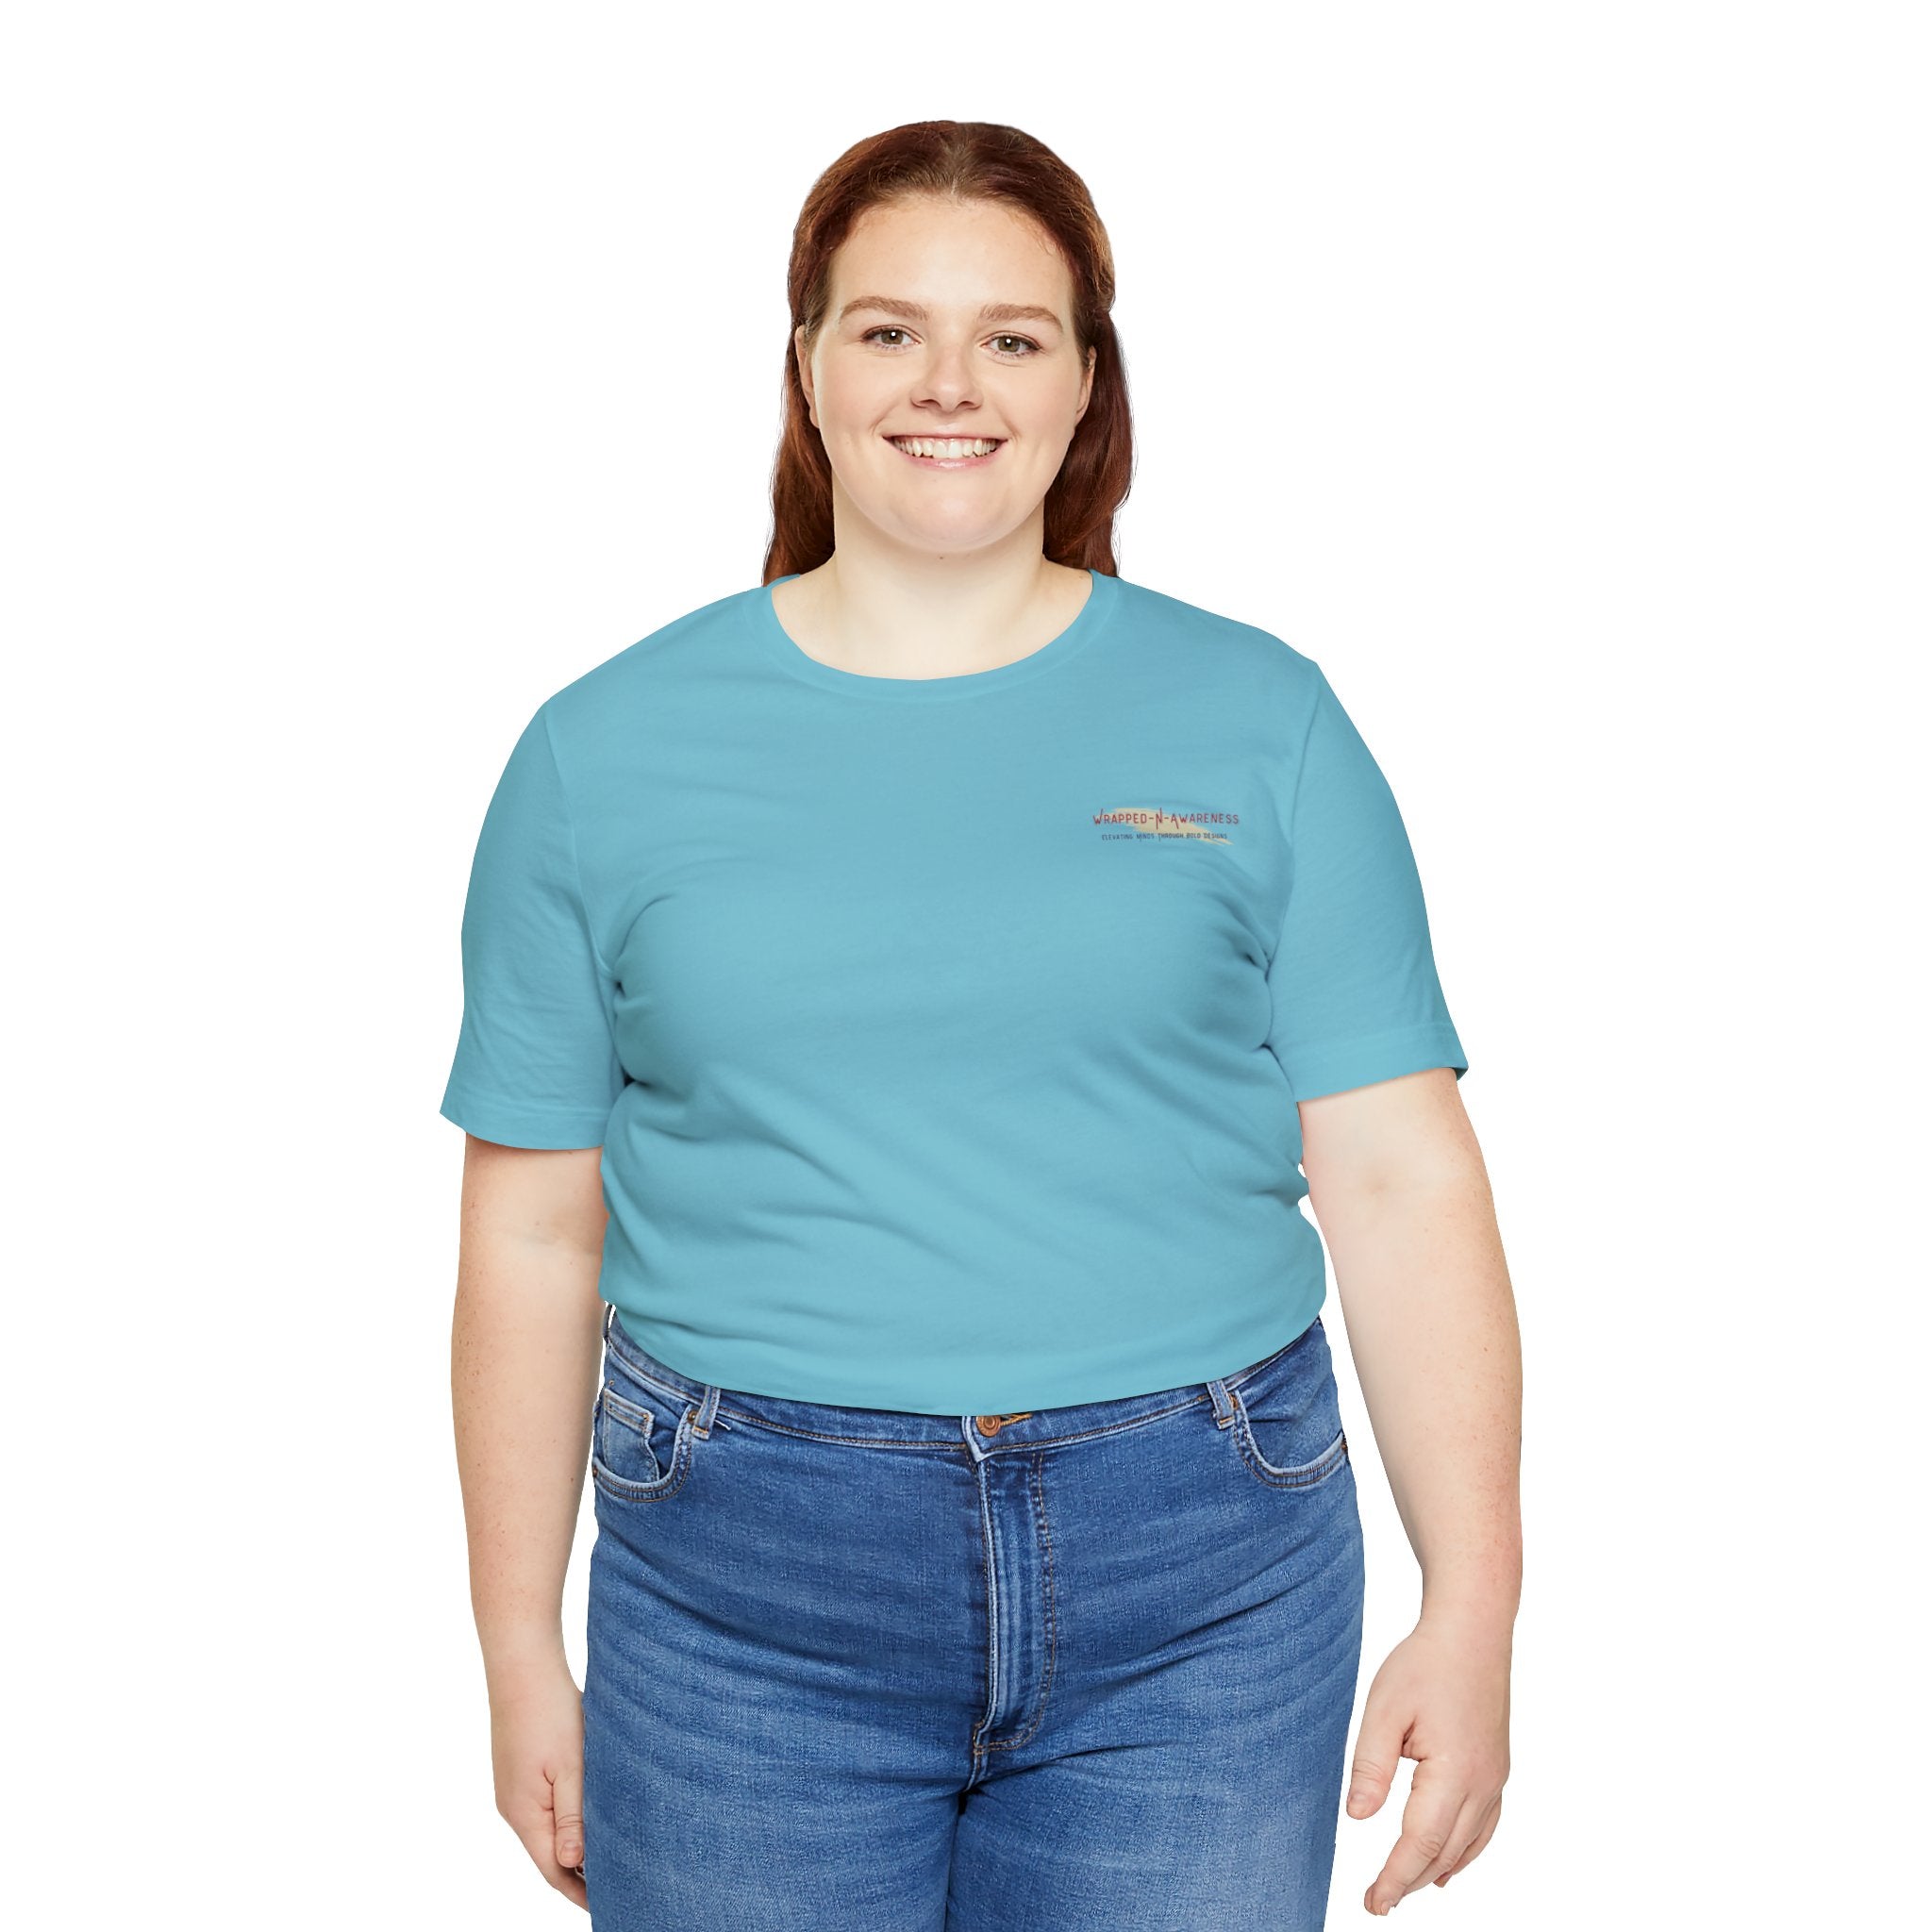 Inspire Growth Jersey Tee - Bella+Canvas 3001 Turquoise Airlume Cotton Bella+Canvas 3001 Crew Neckline Jersey Short Sleeve Lightweight Fabric Mental Health Support Retail Fit Tear-away Label Tee Unisex Tee T-Shirt 11470185436222884401_2048 Printify